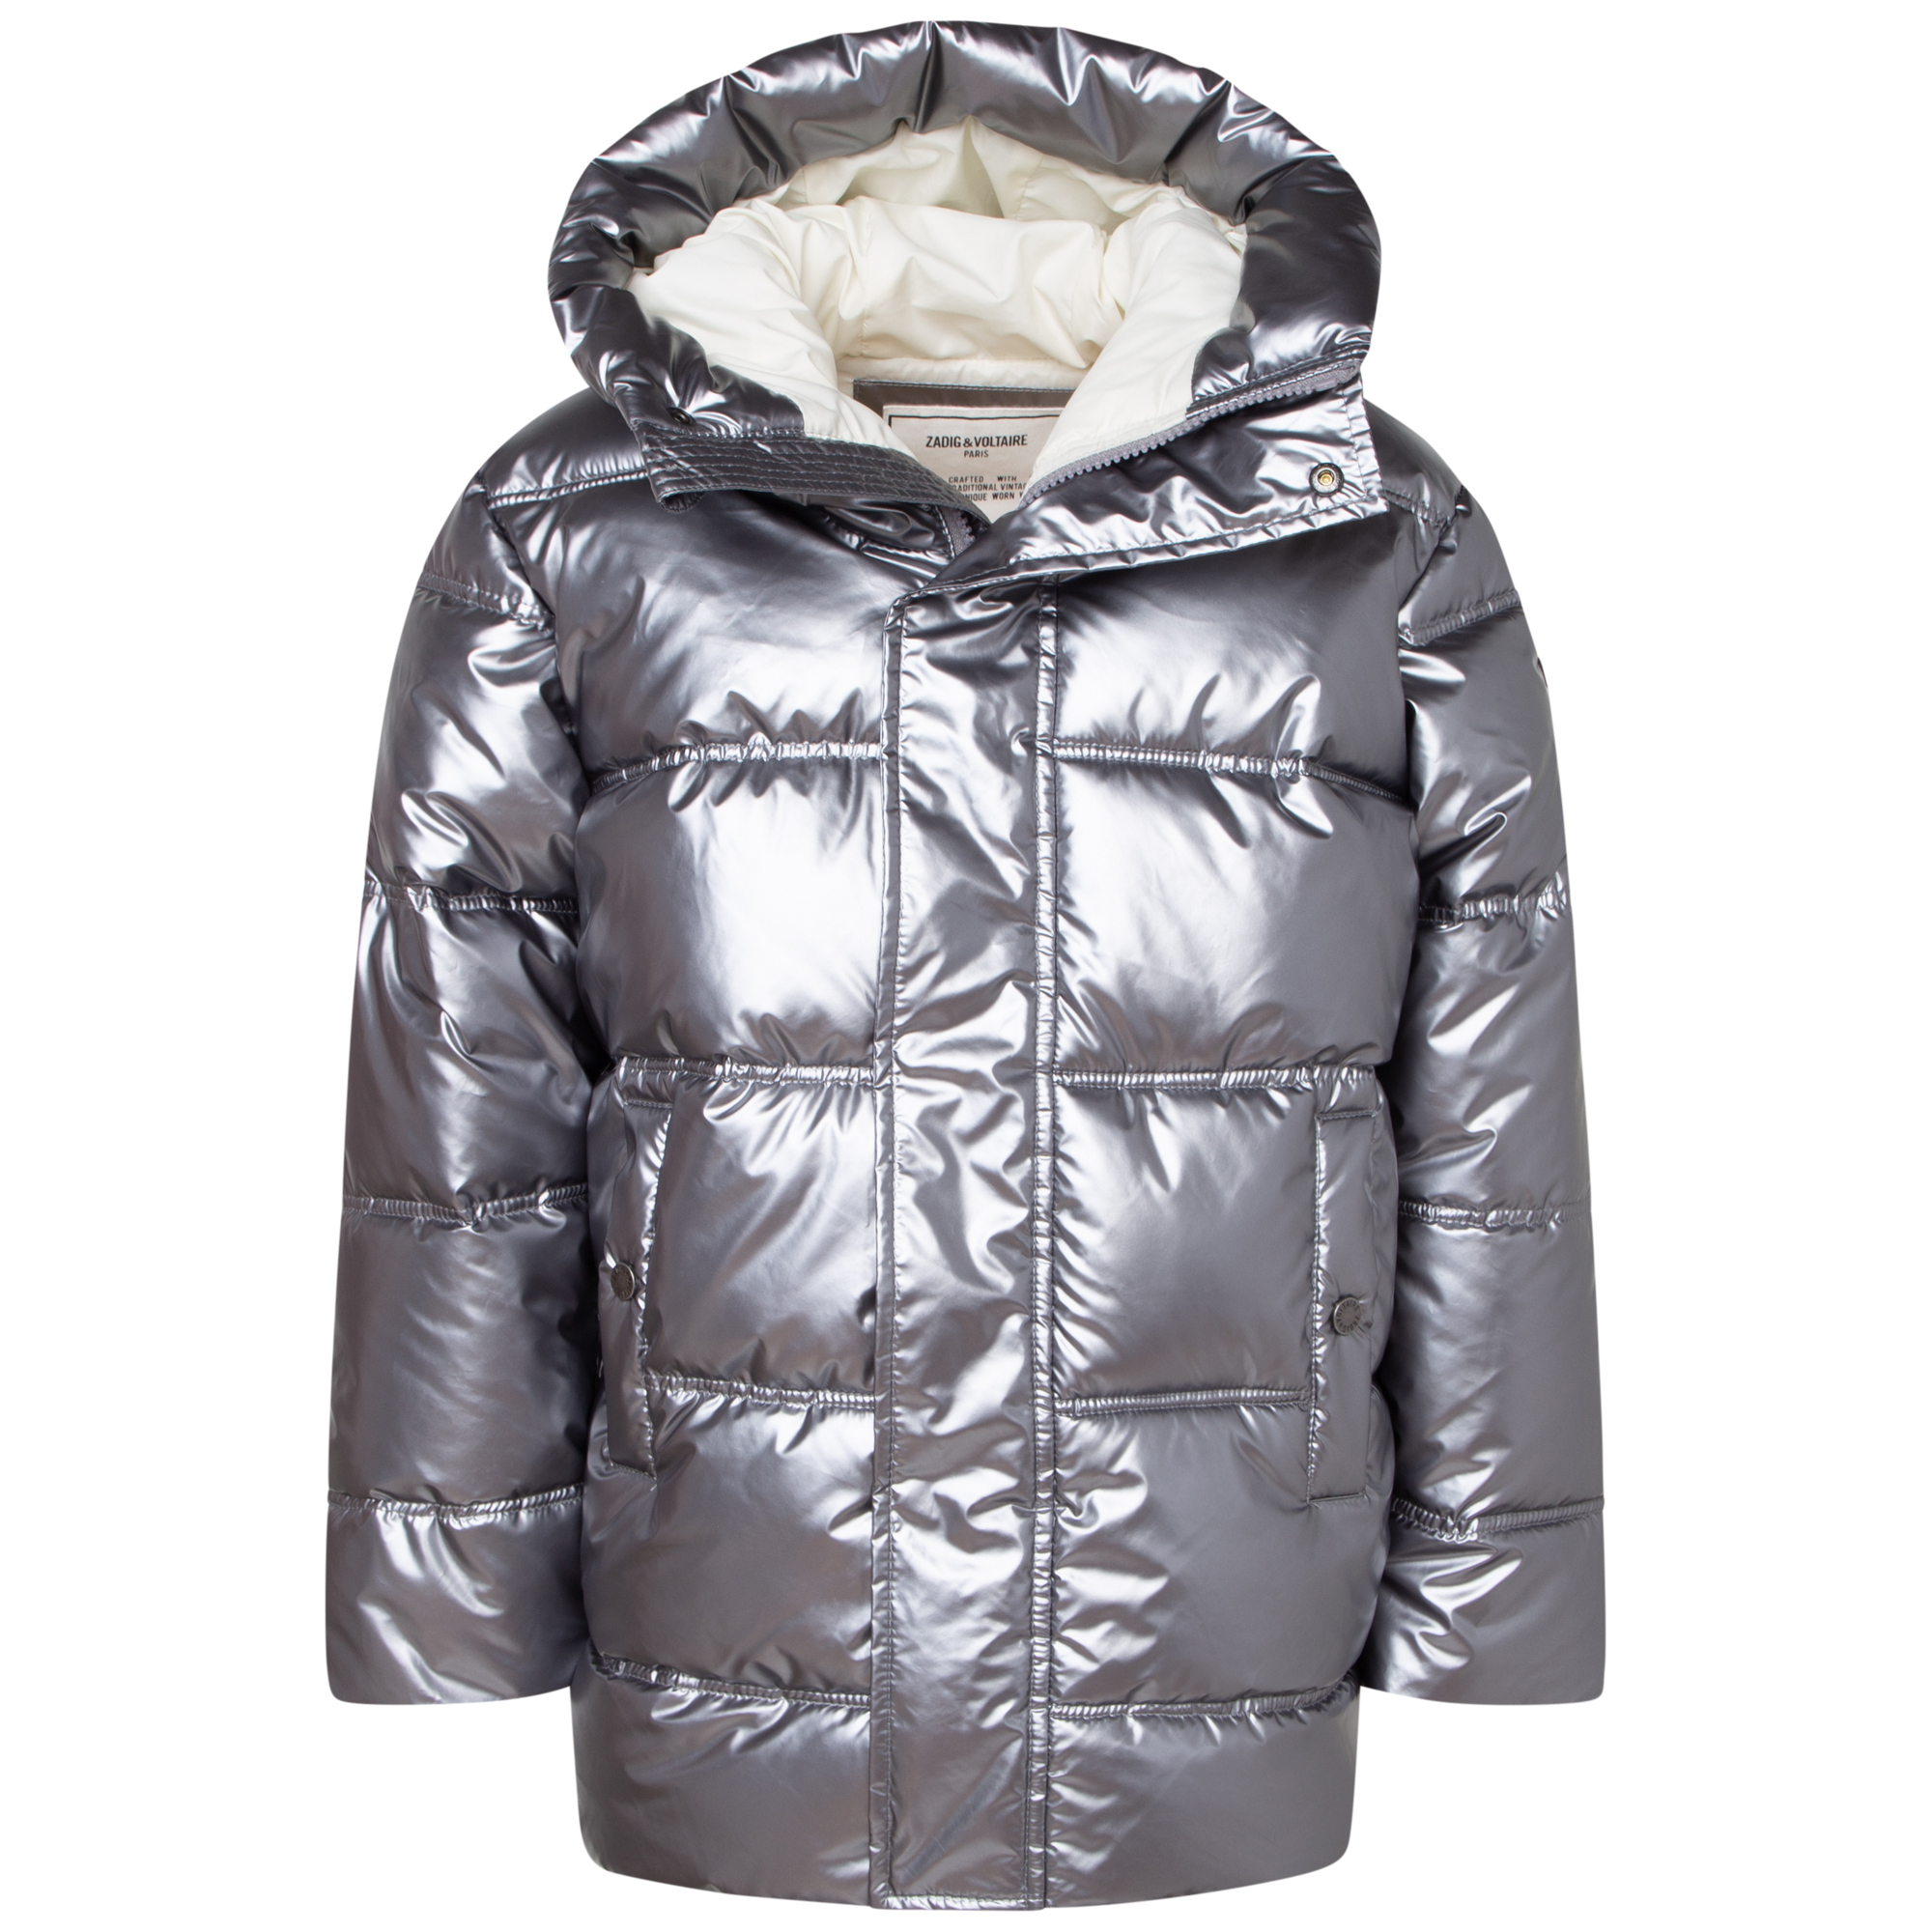 Water-resistant puffer jacket ZADIG & VOLTAIRE for GIRL